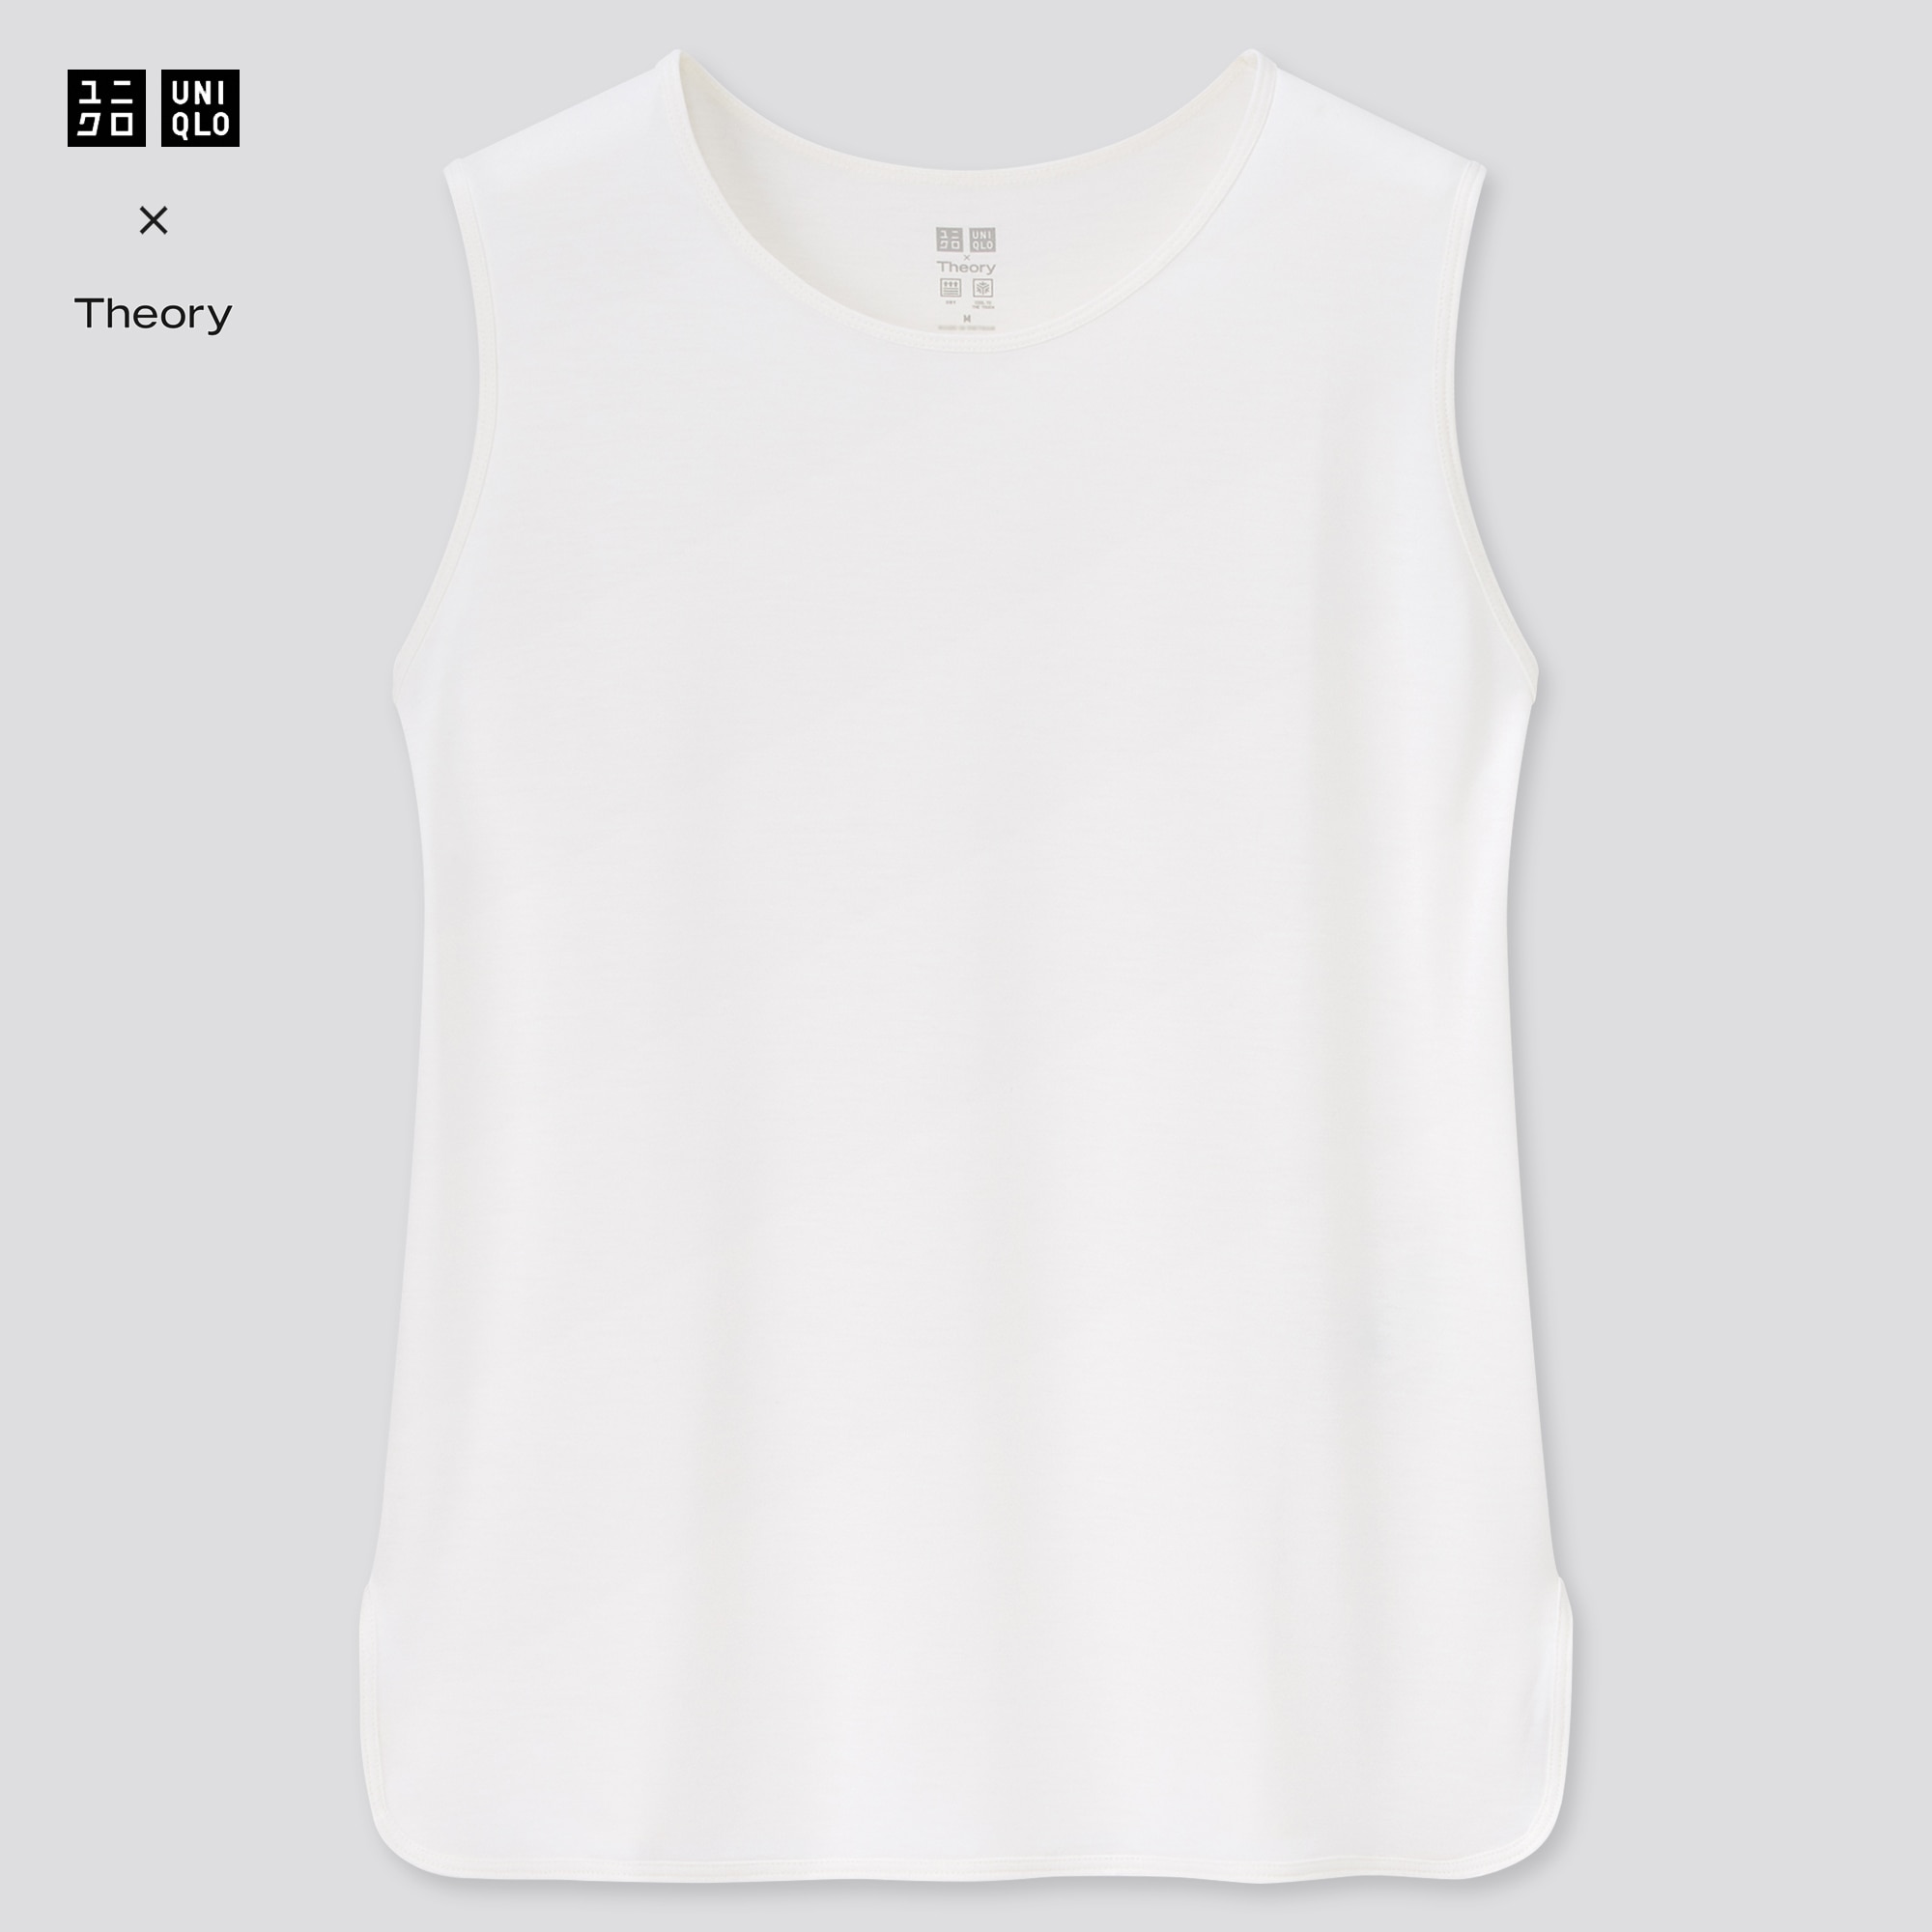 Uniqlo Airism Men Singlet Mesh Tank Top L Size White Mens Fashion Tops   Sets Formal Shirts on Carousell